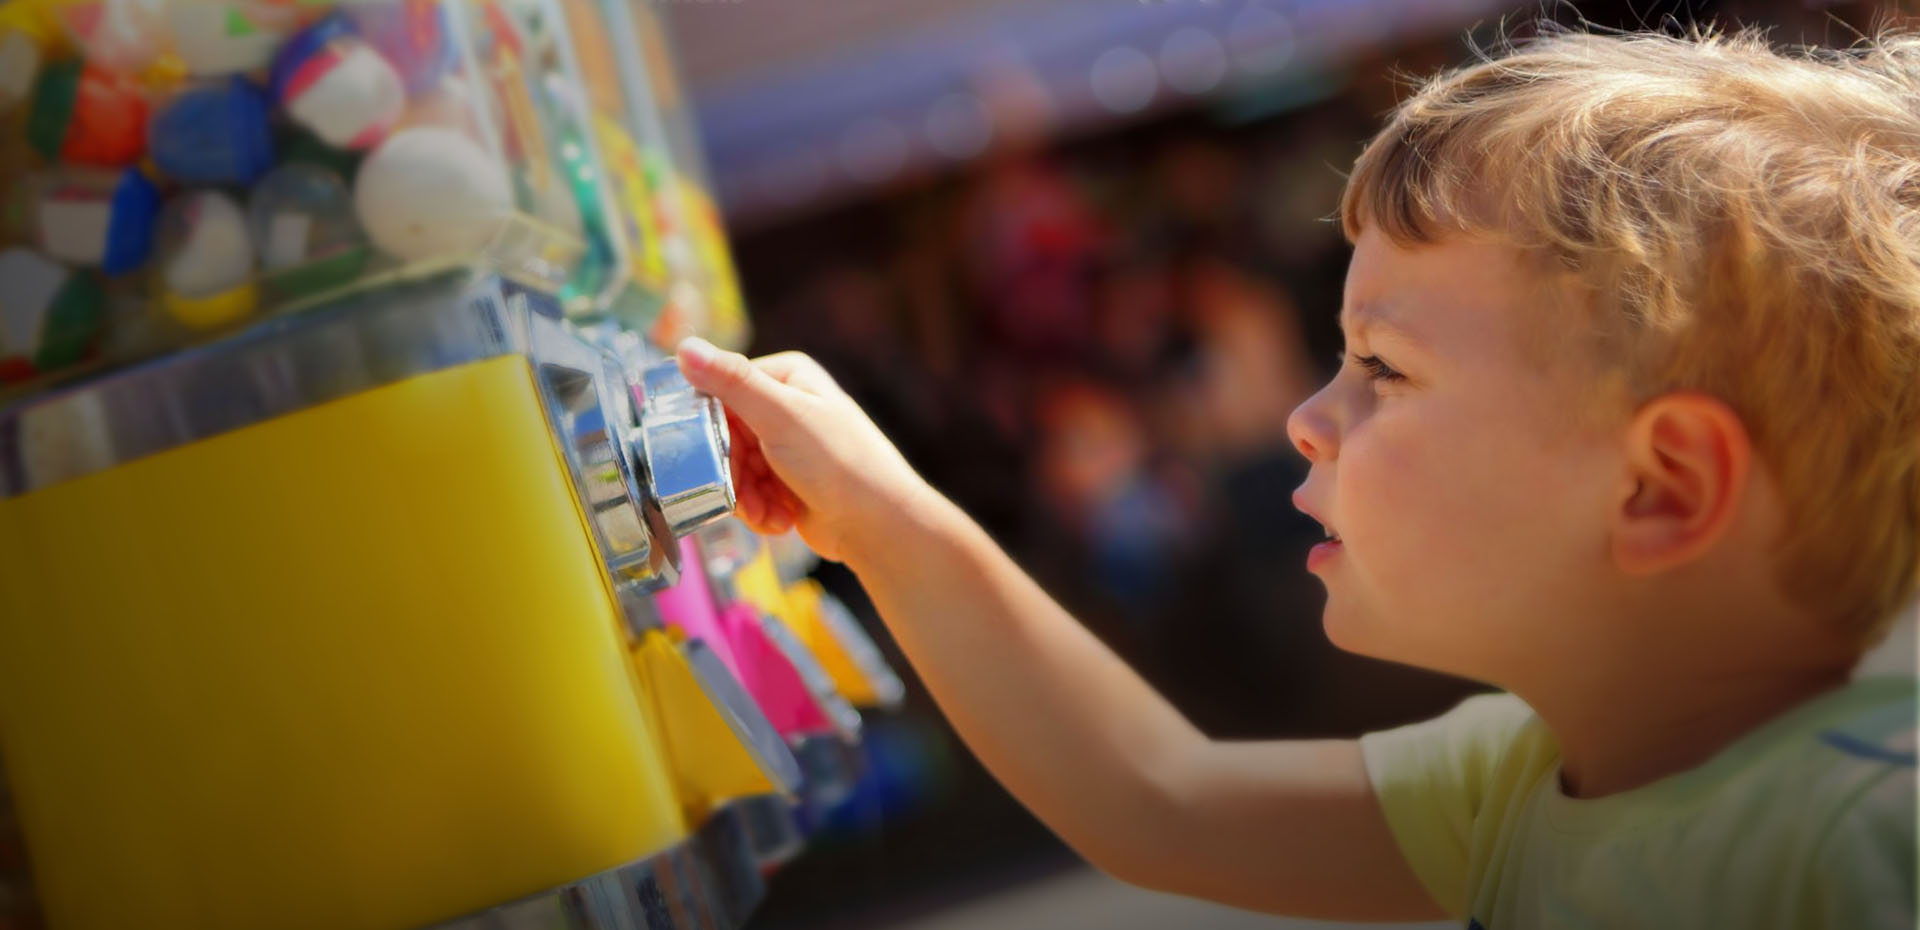 Installers Of Toys Vending Machines For Shopping Centres Leicestershire